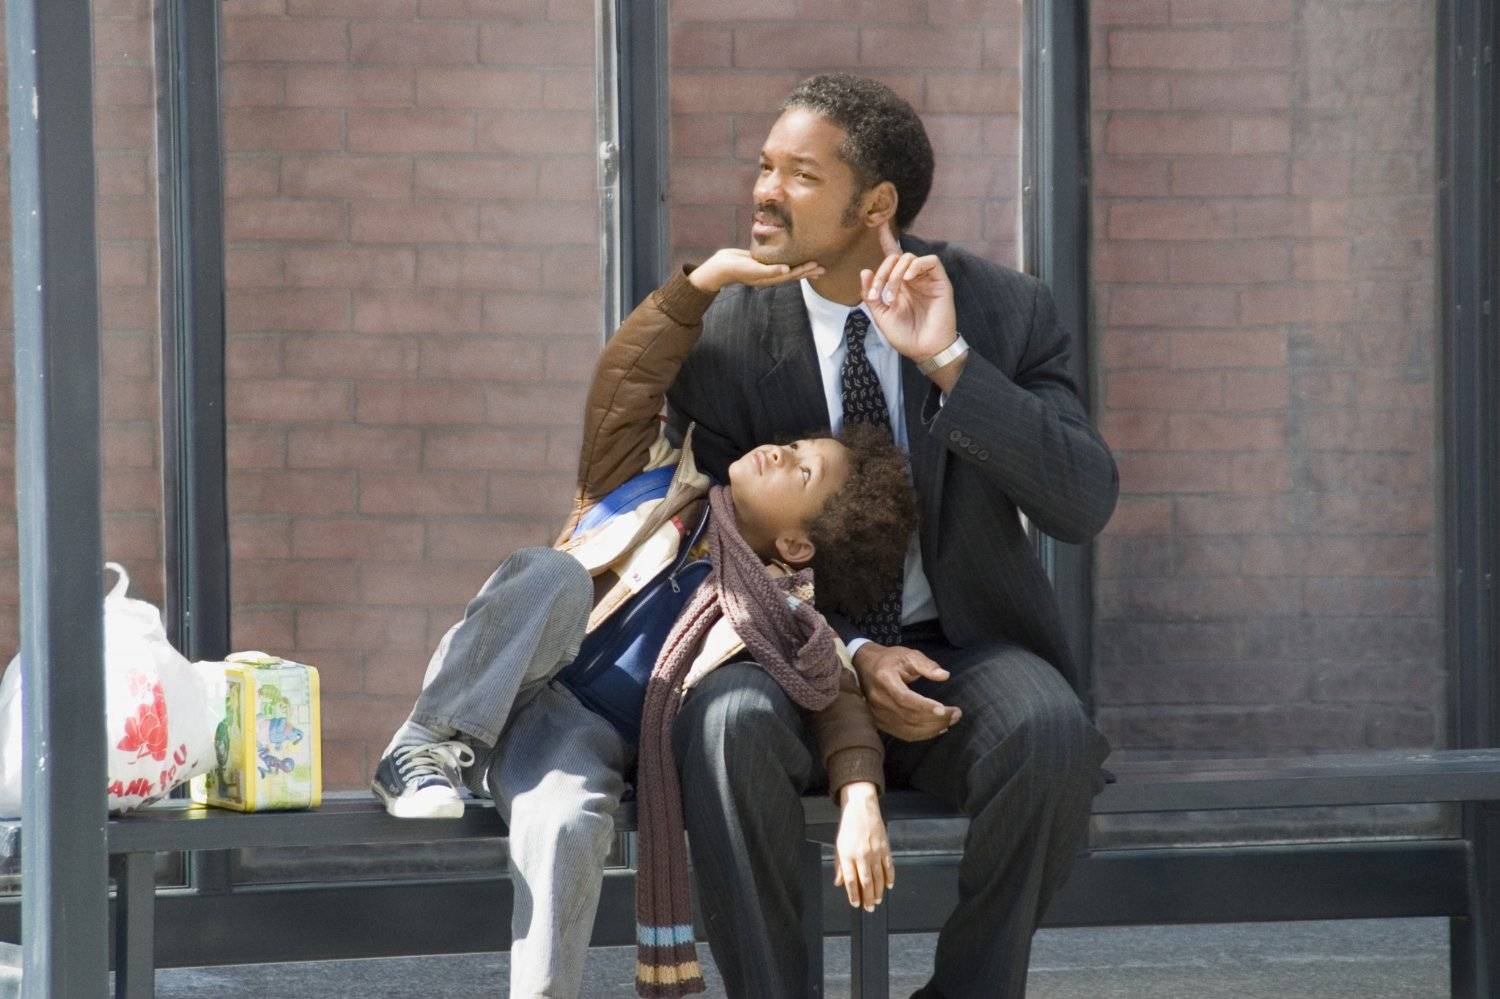 The Pursuit Of Happyness / The Pursuit Of Happyness (2006)